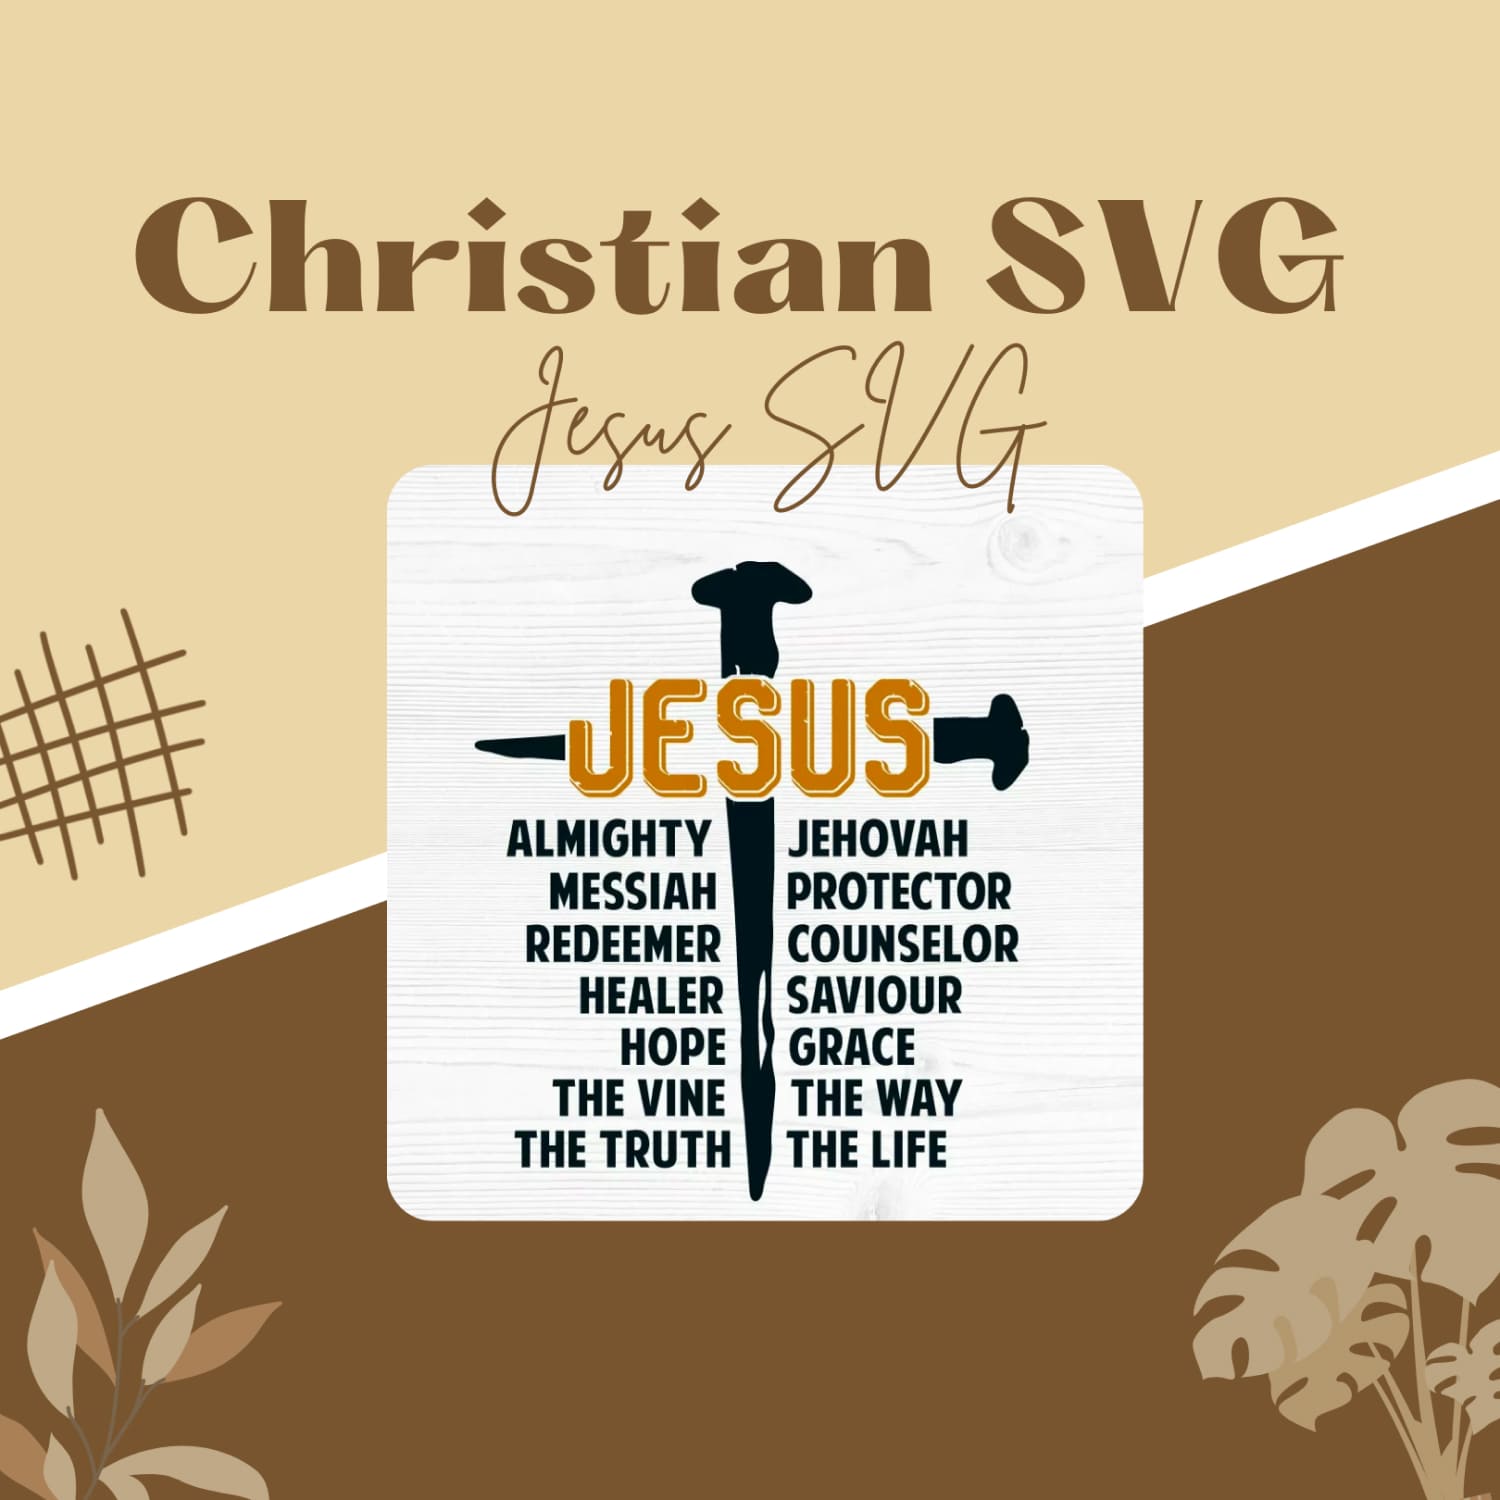 Christian SVG with Jesus values.